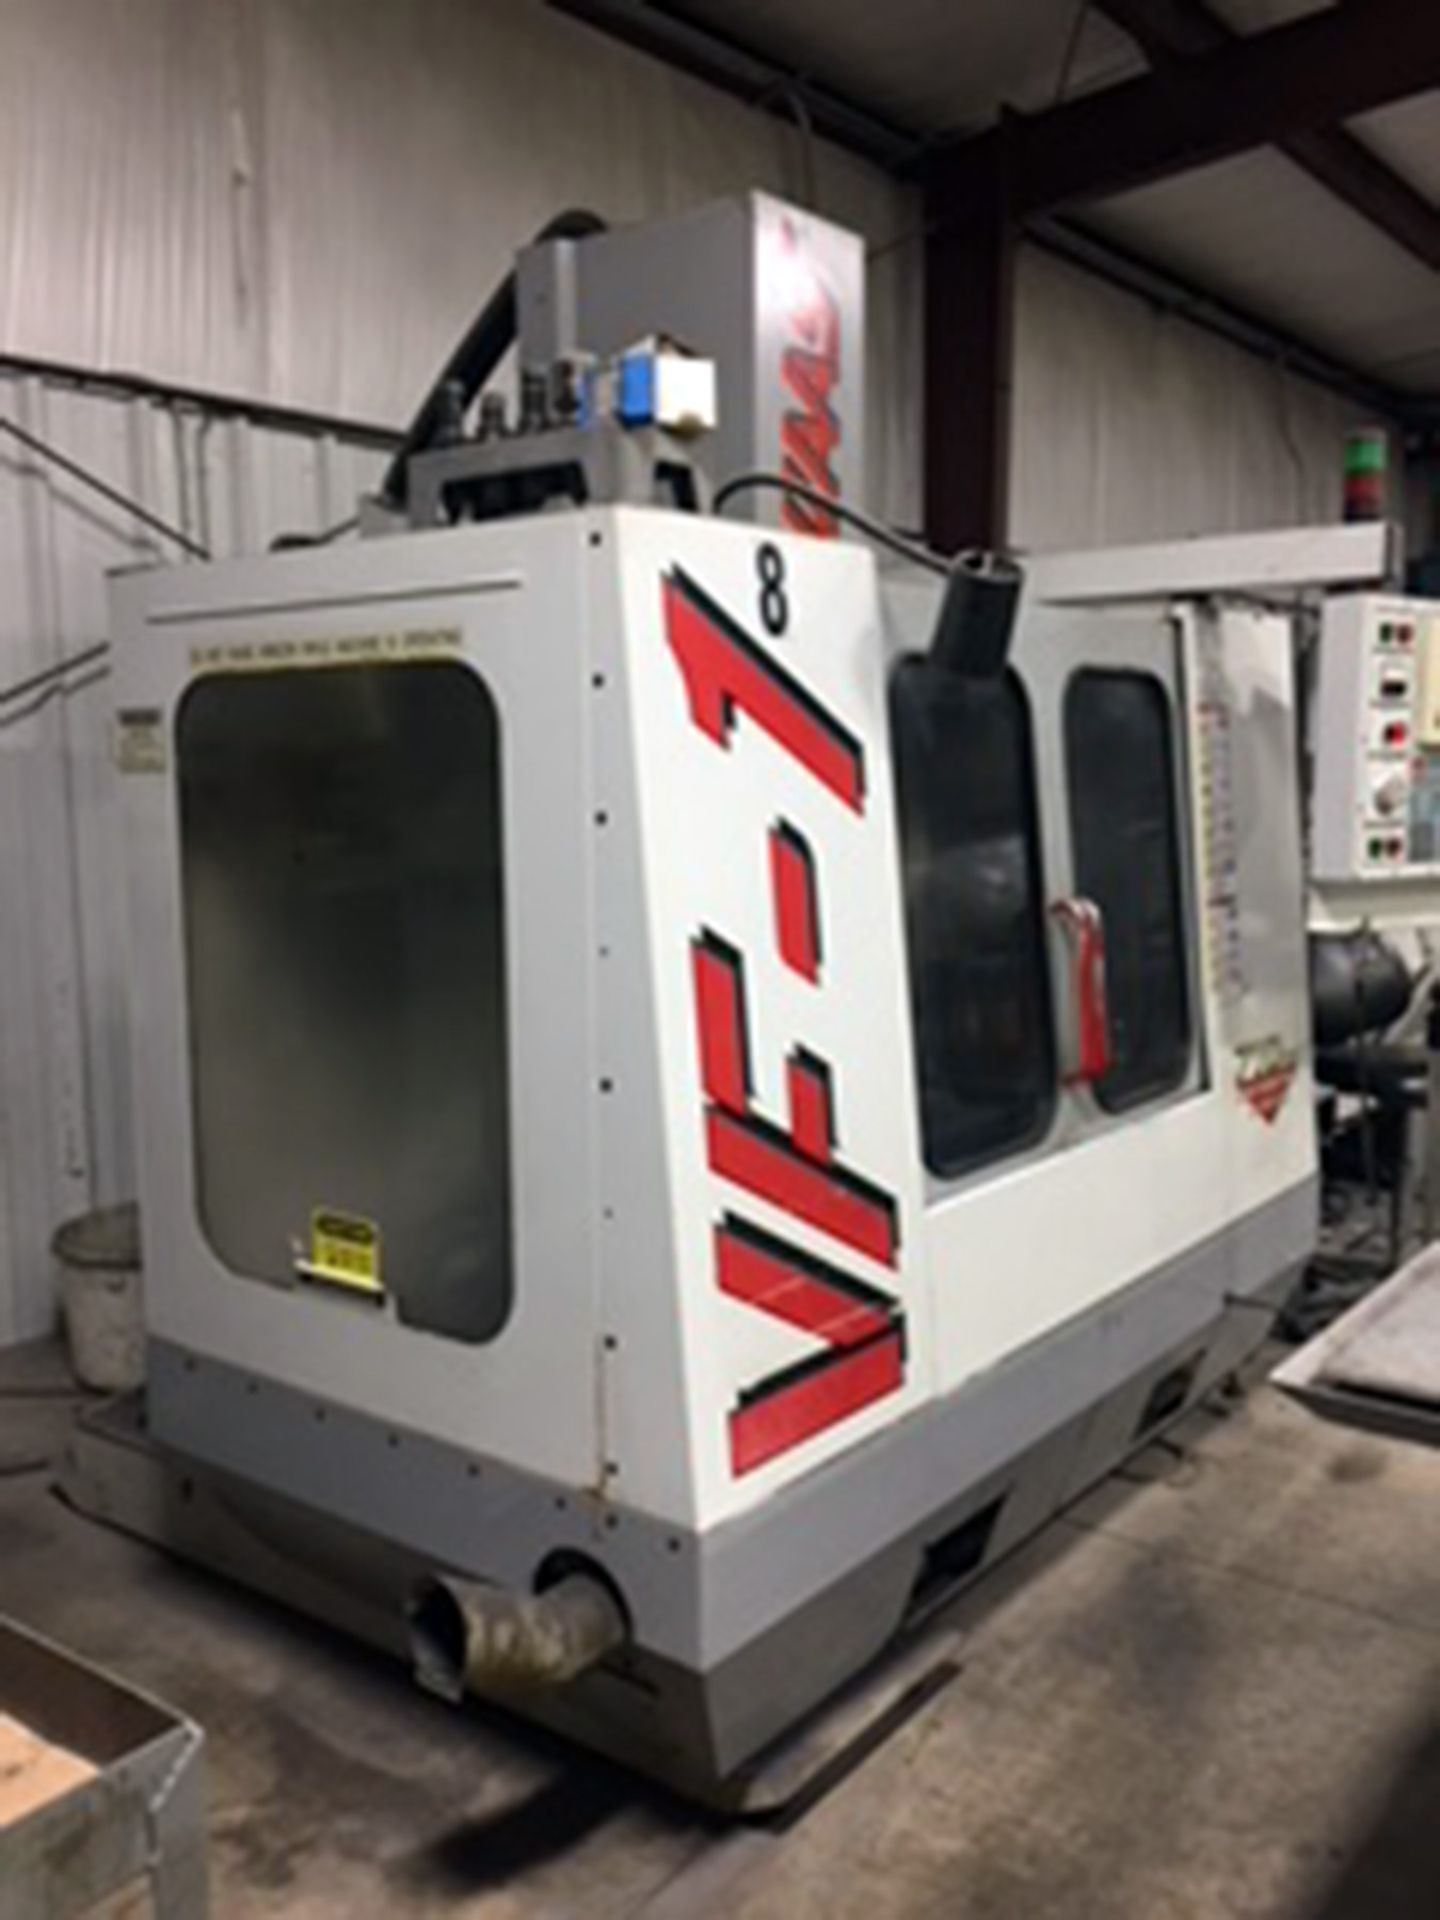 Haas VF-1 CNC Vertical Machining Center - Image 2 of 9